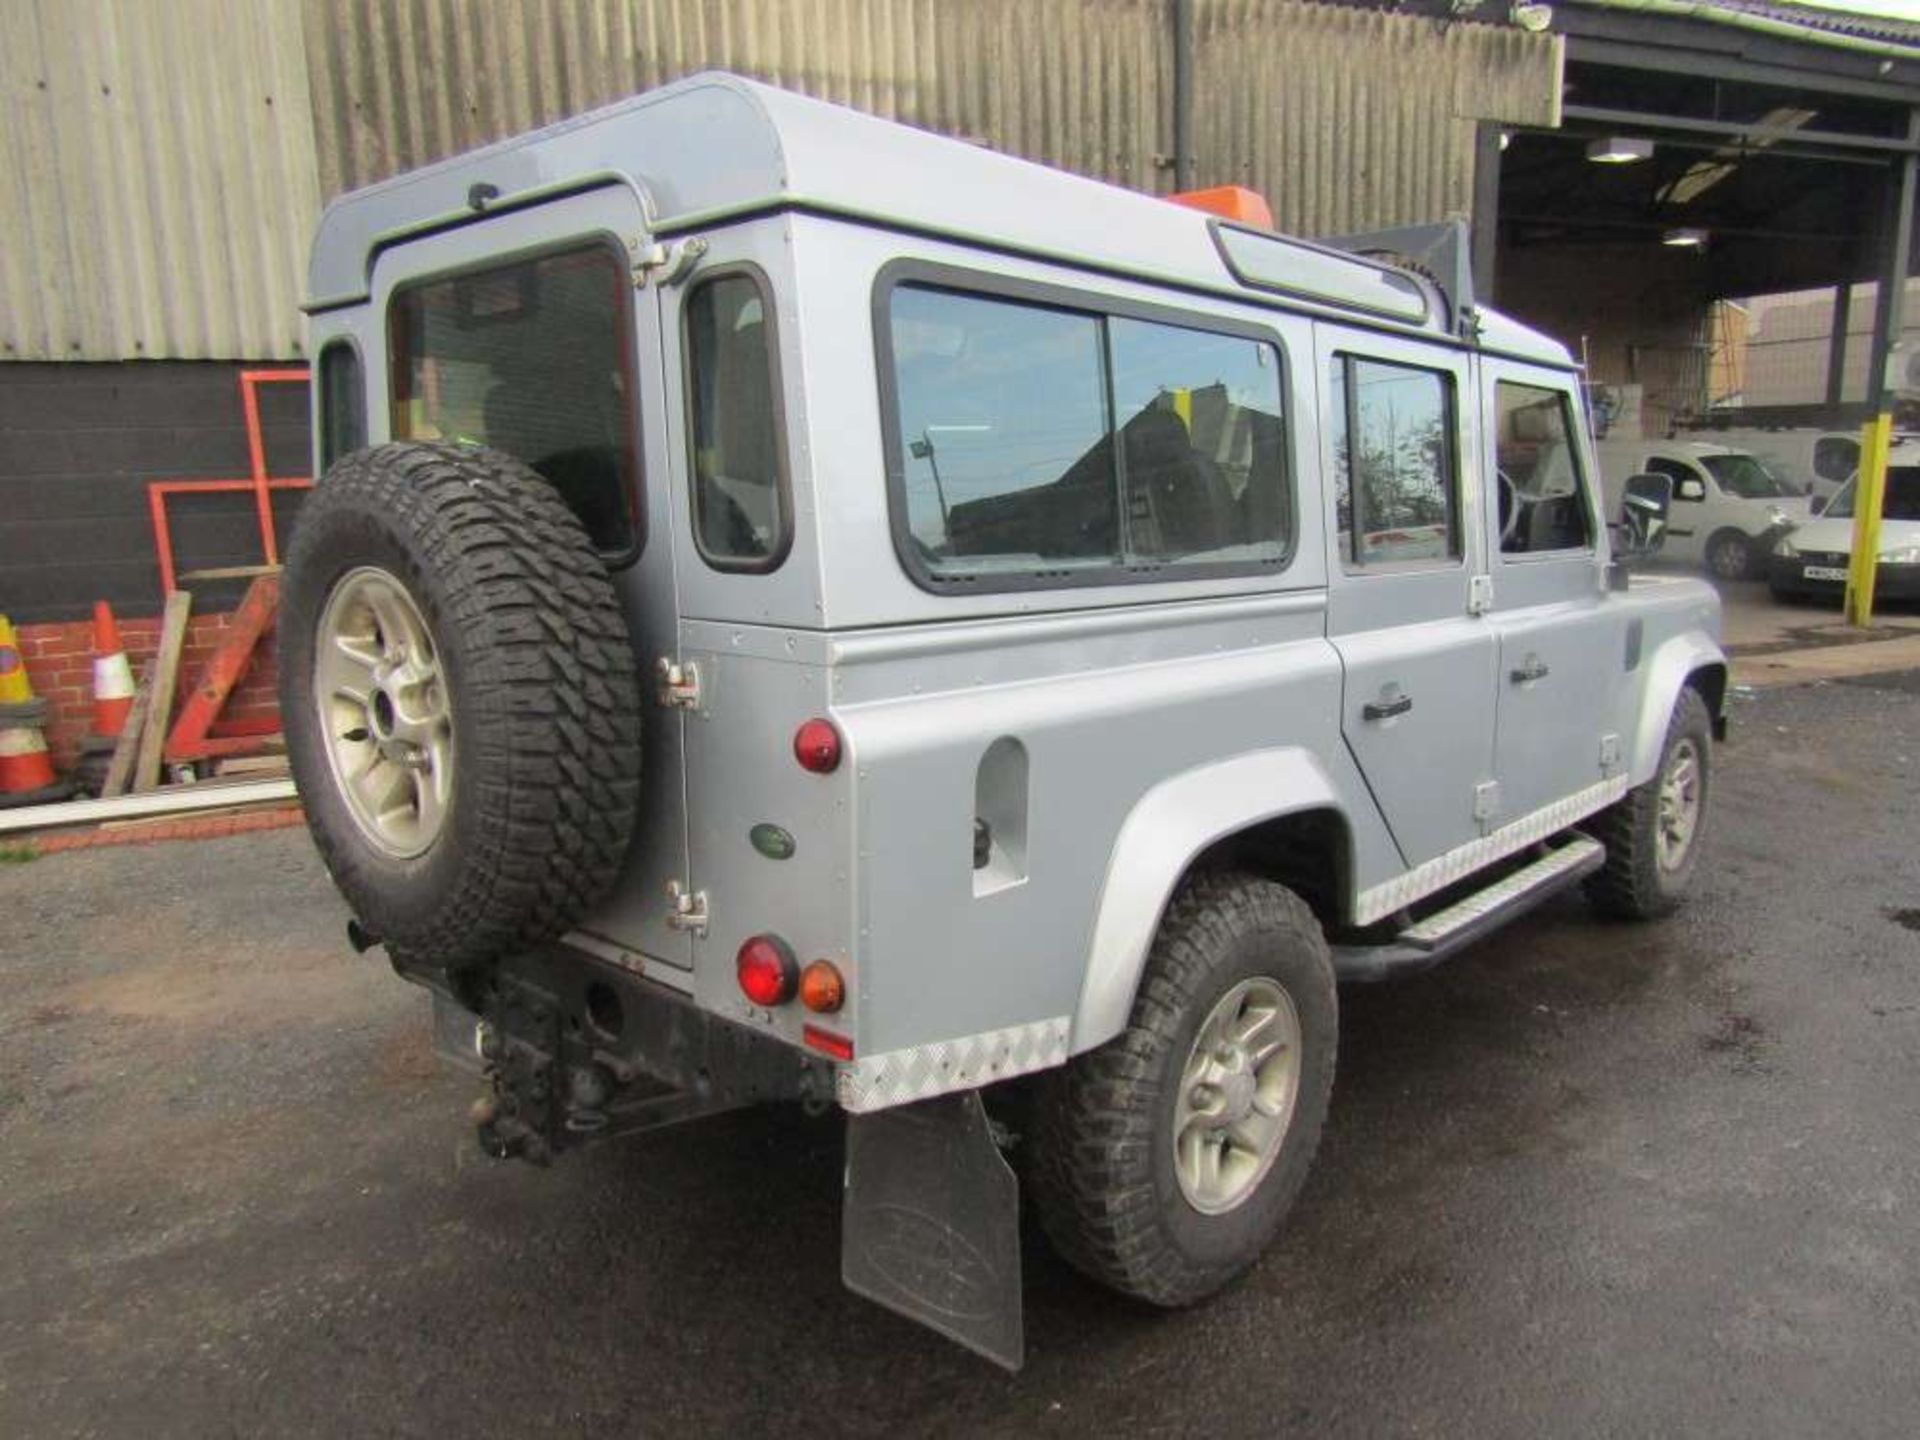 2010 59 reg Land Rover Defender 110 XS 7 Seater Station Wagon - Image 4 of 7